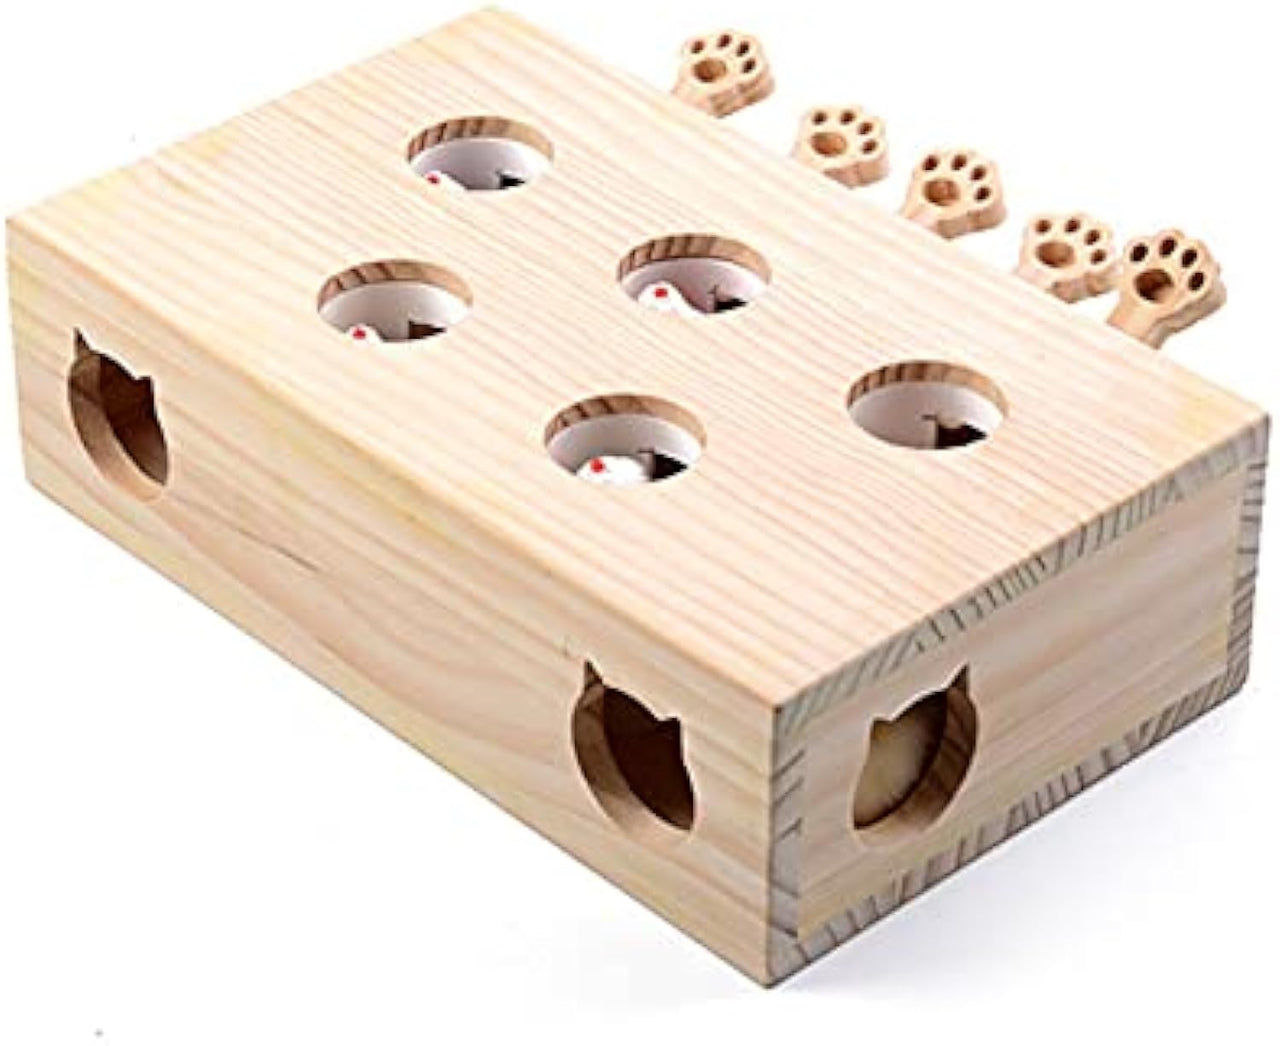 🔥The Last Day 36% OFF🔥 Cat Interactive Wooden Toys Whack